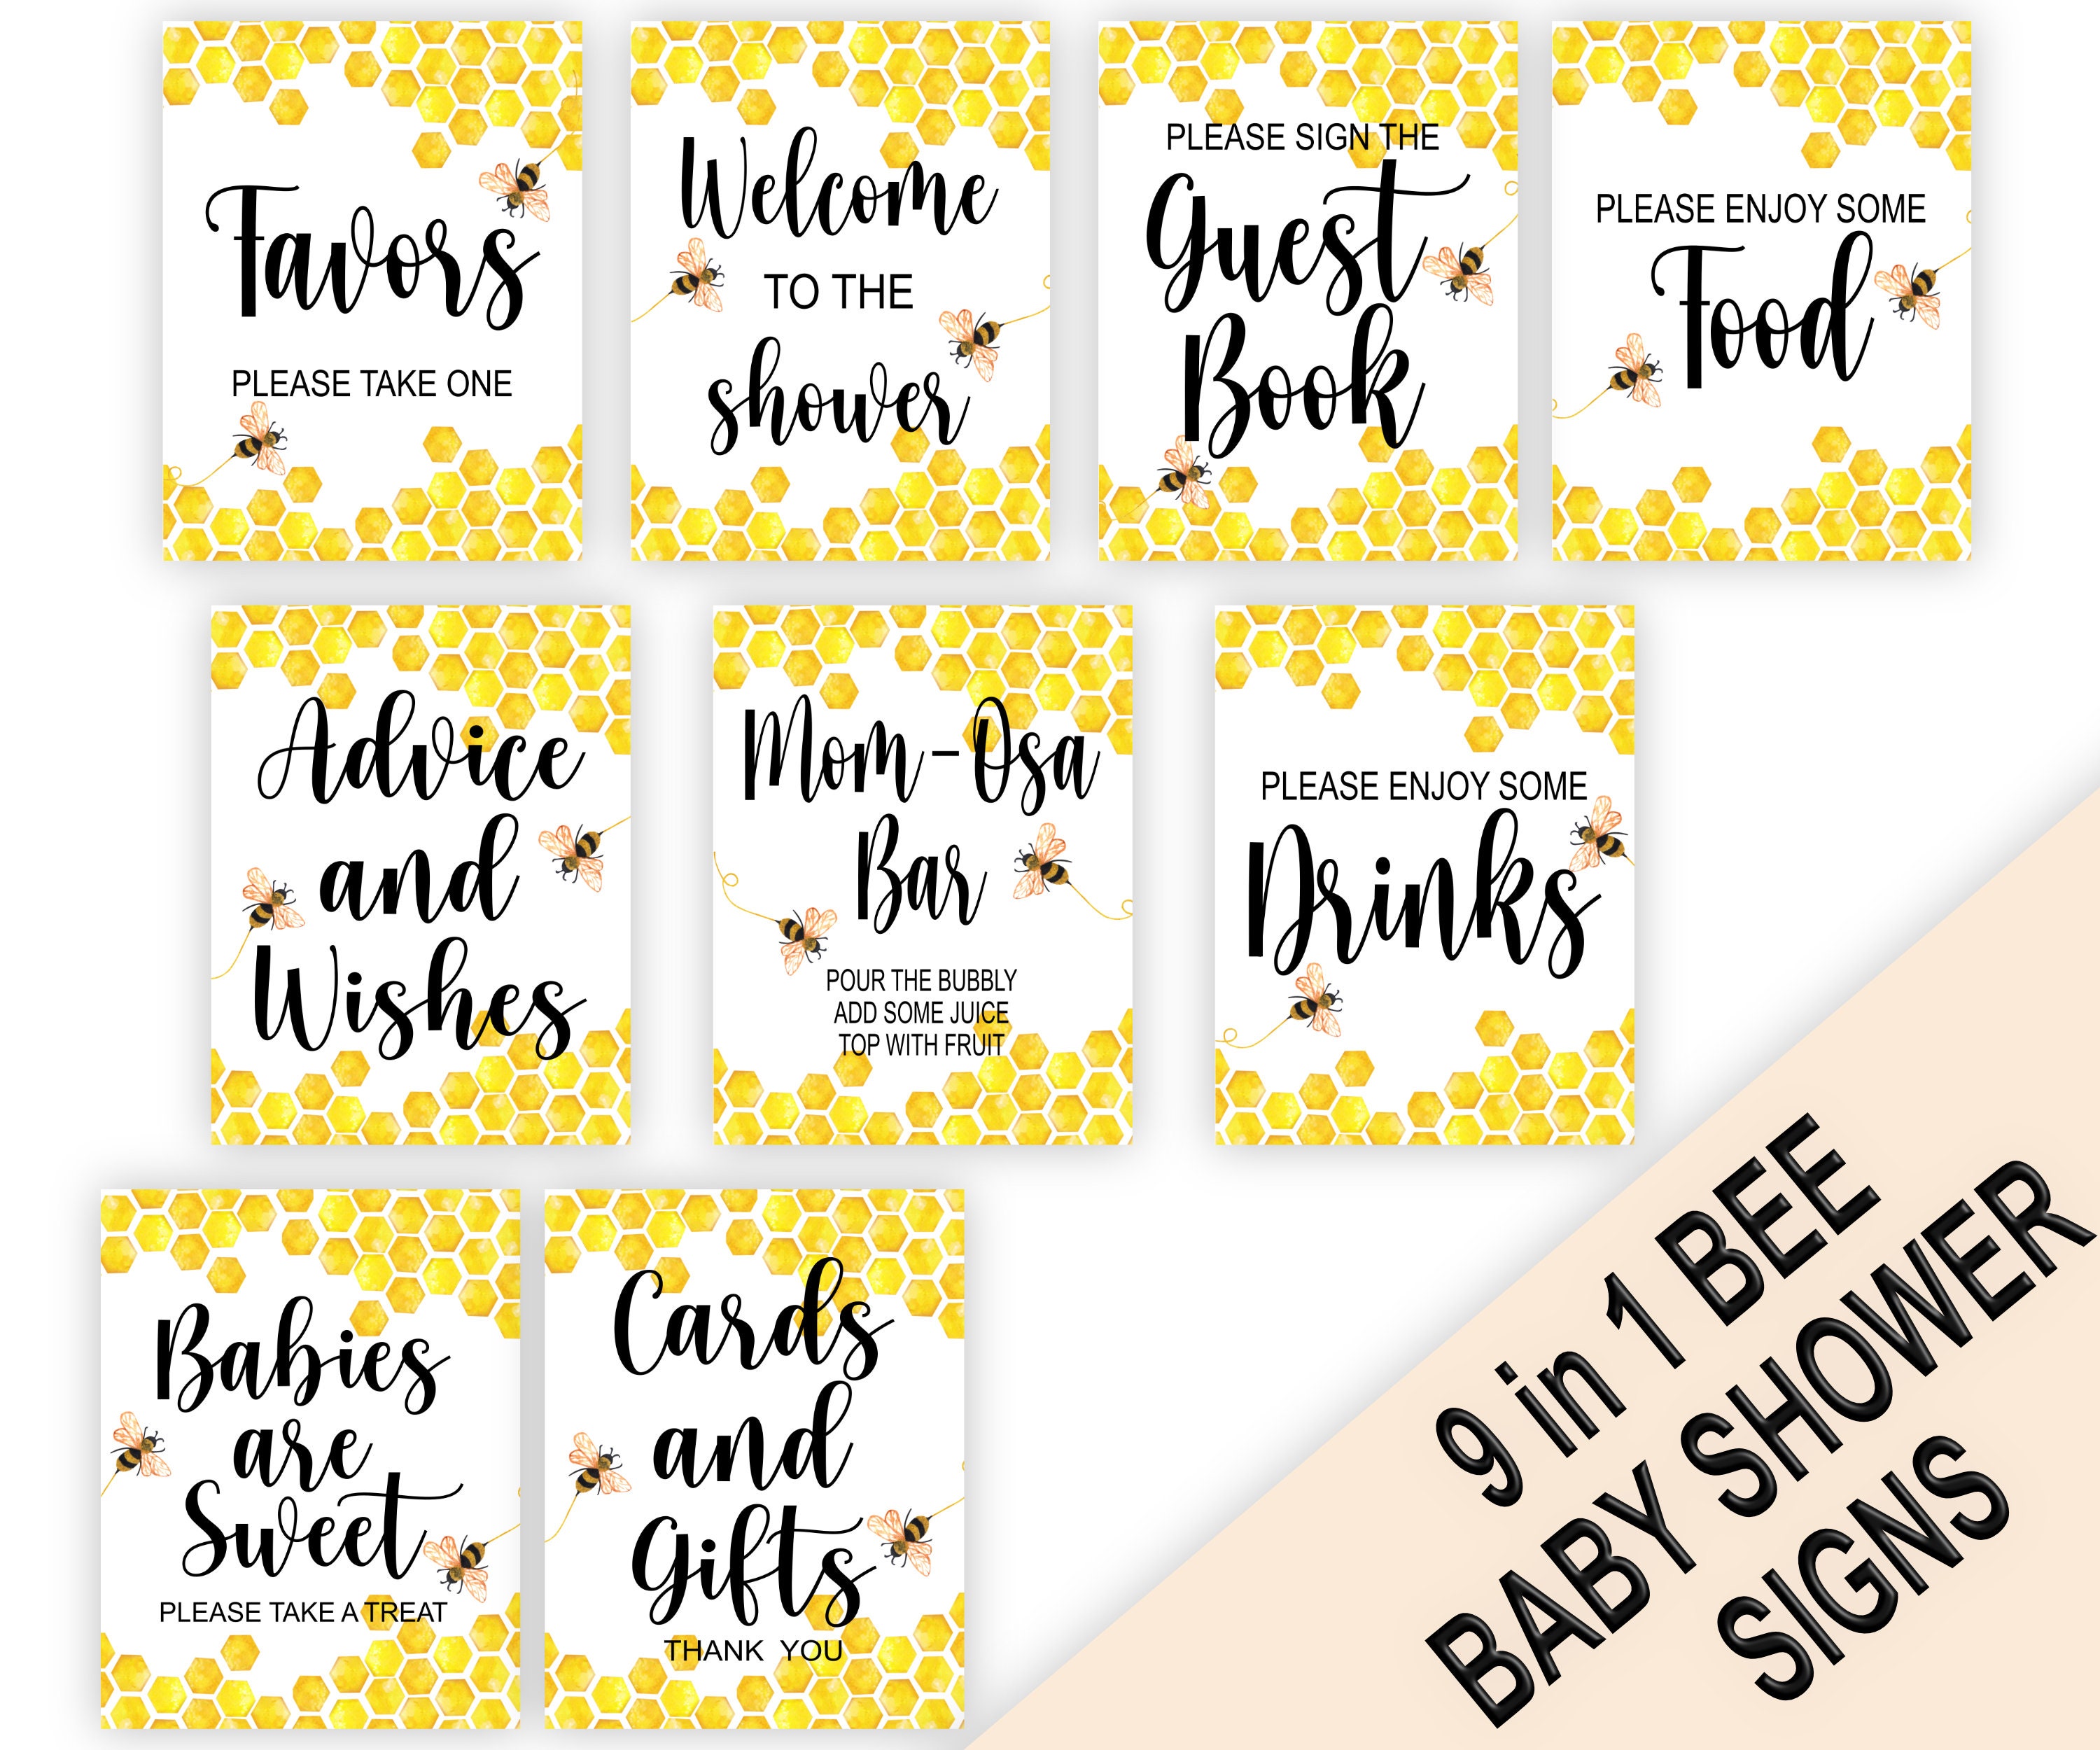 Honey Bee Party Decorations, Bee Baby Centerpieces Honeycomb Decorations  With Bee Sunflower Stickers Baby Shower Birthday Table Decoration 